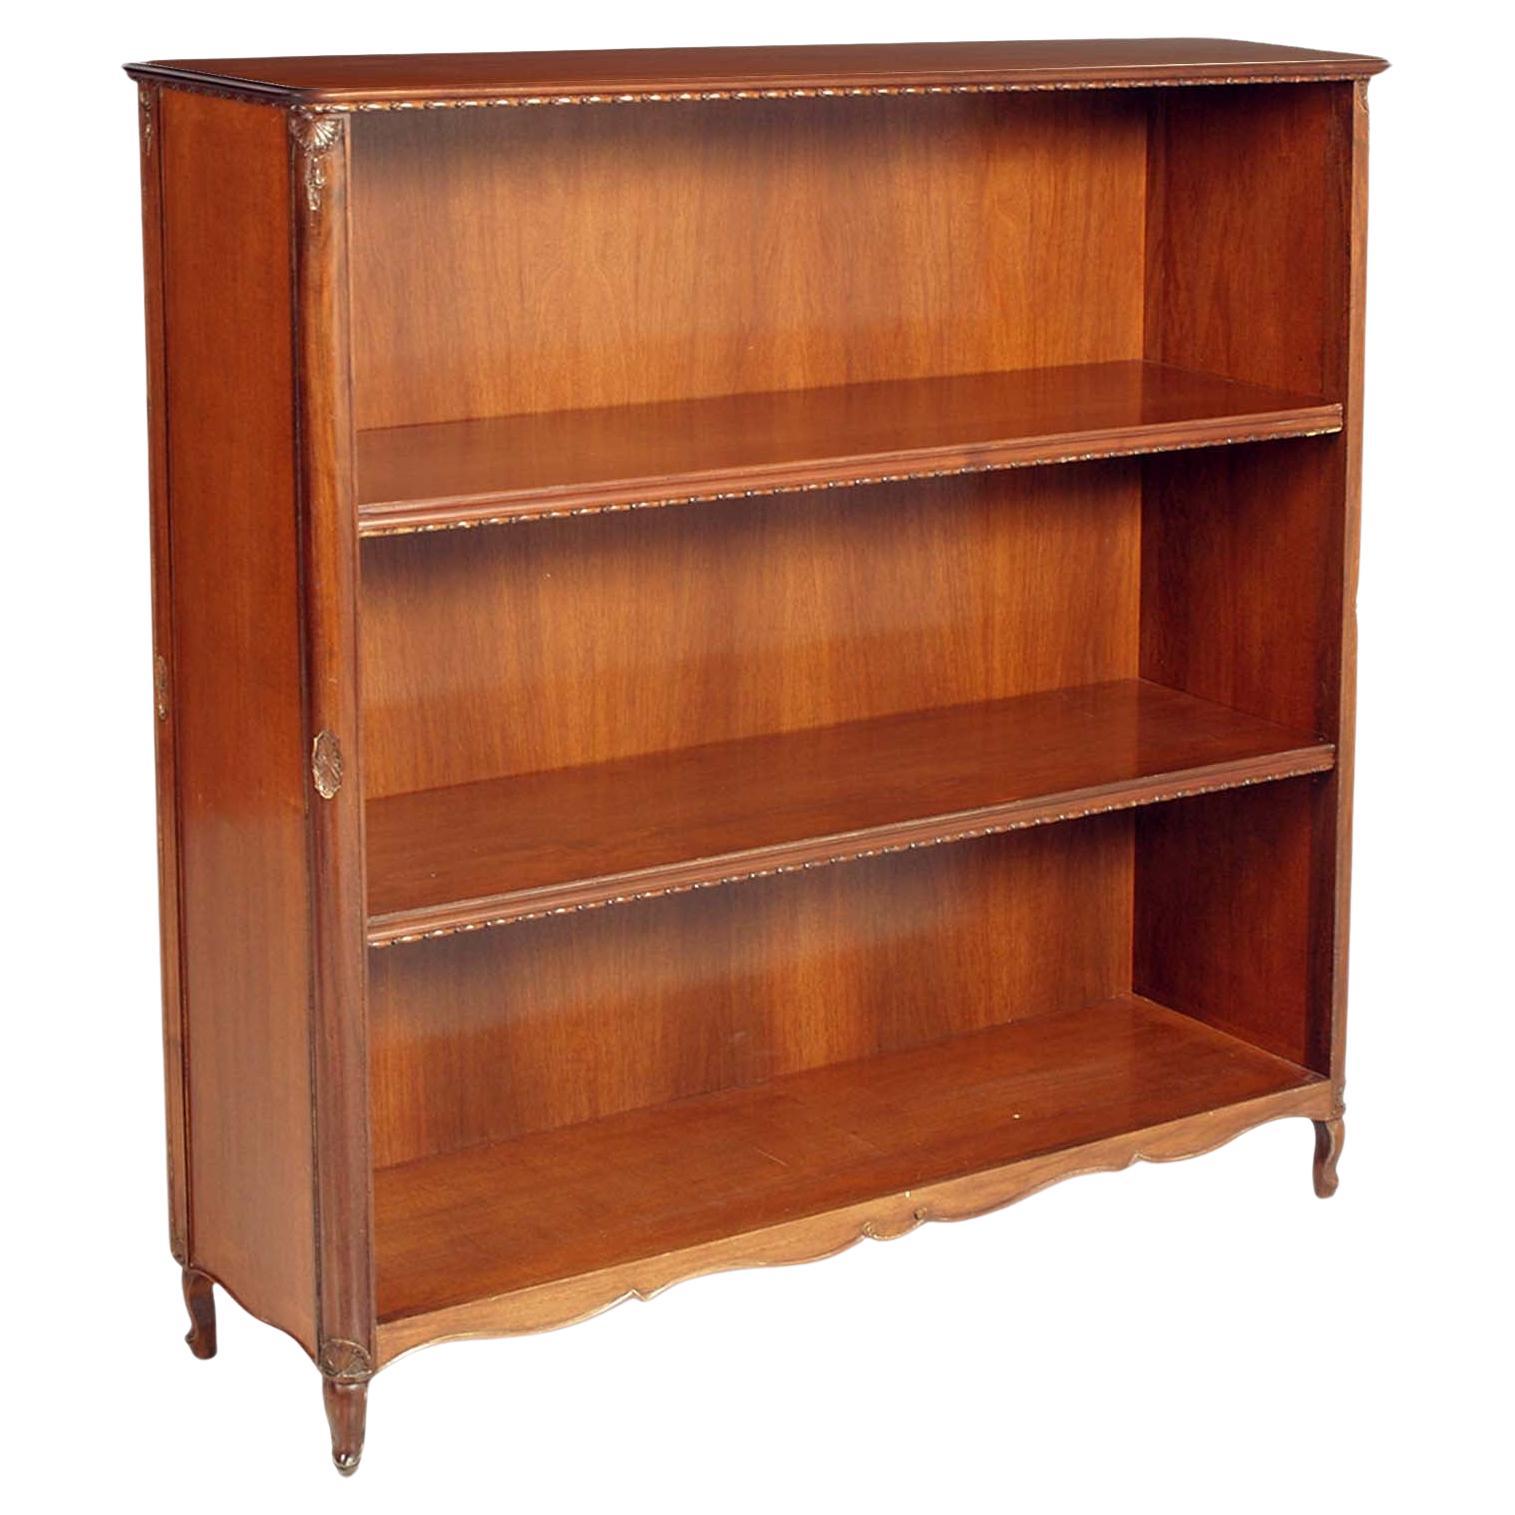 1930s Open Bookcase in Neoclassical Carved Mahogany, by Bassano's Ebanistery